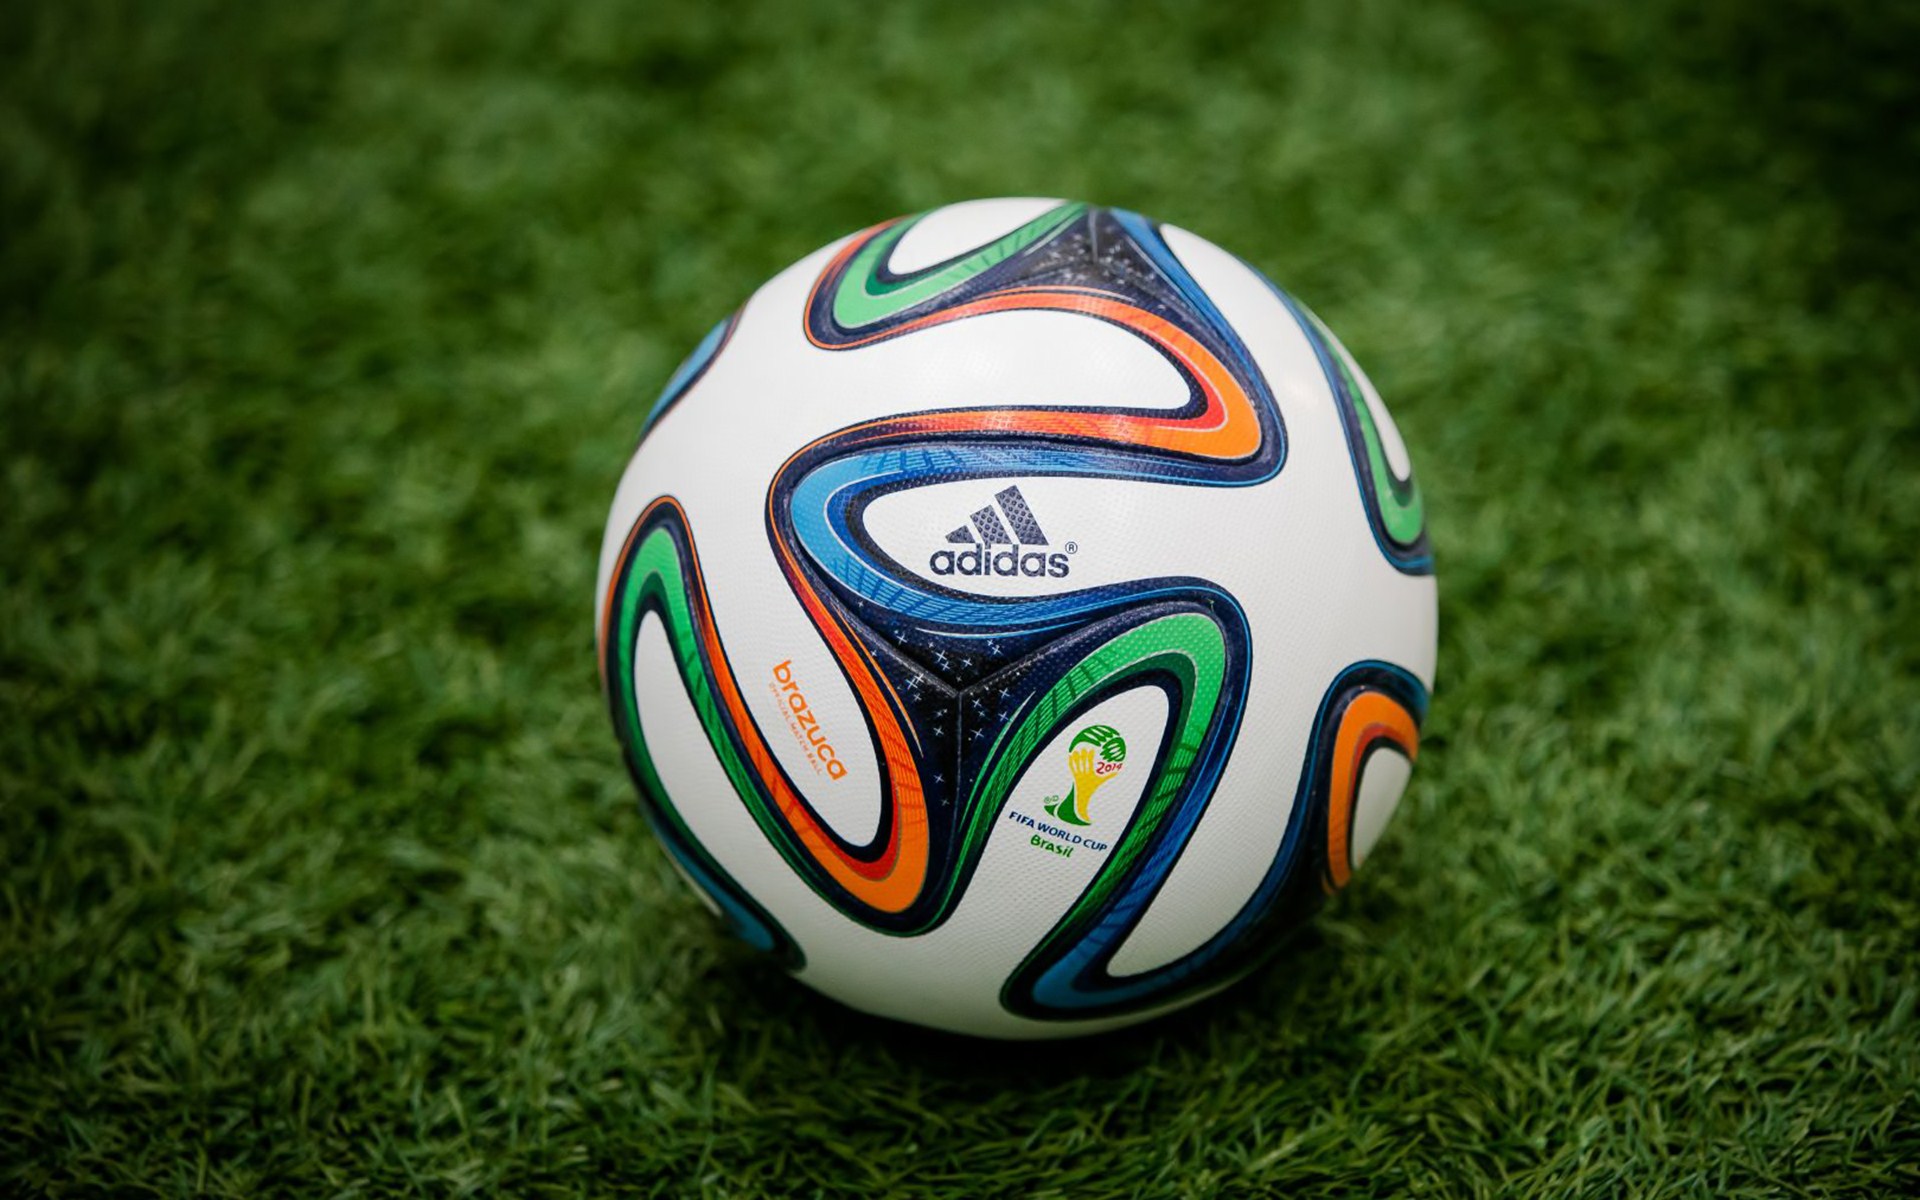 World Cup 2014 Wallpapers | Best Wallpapers
